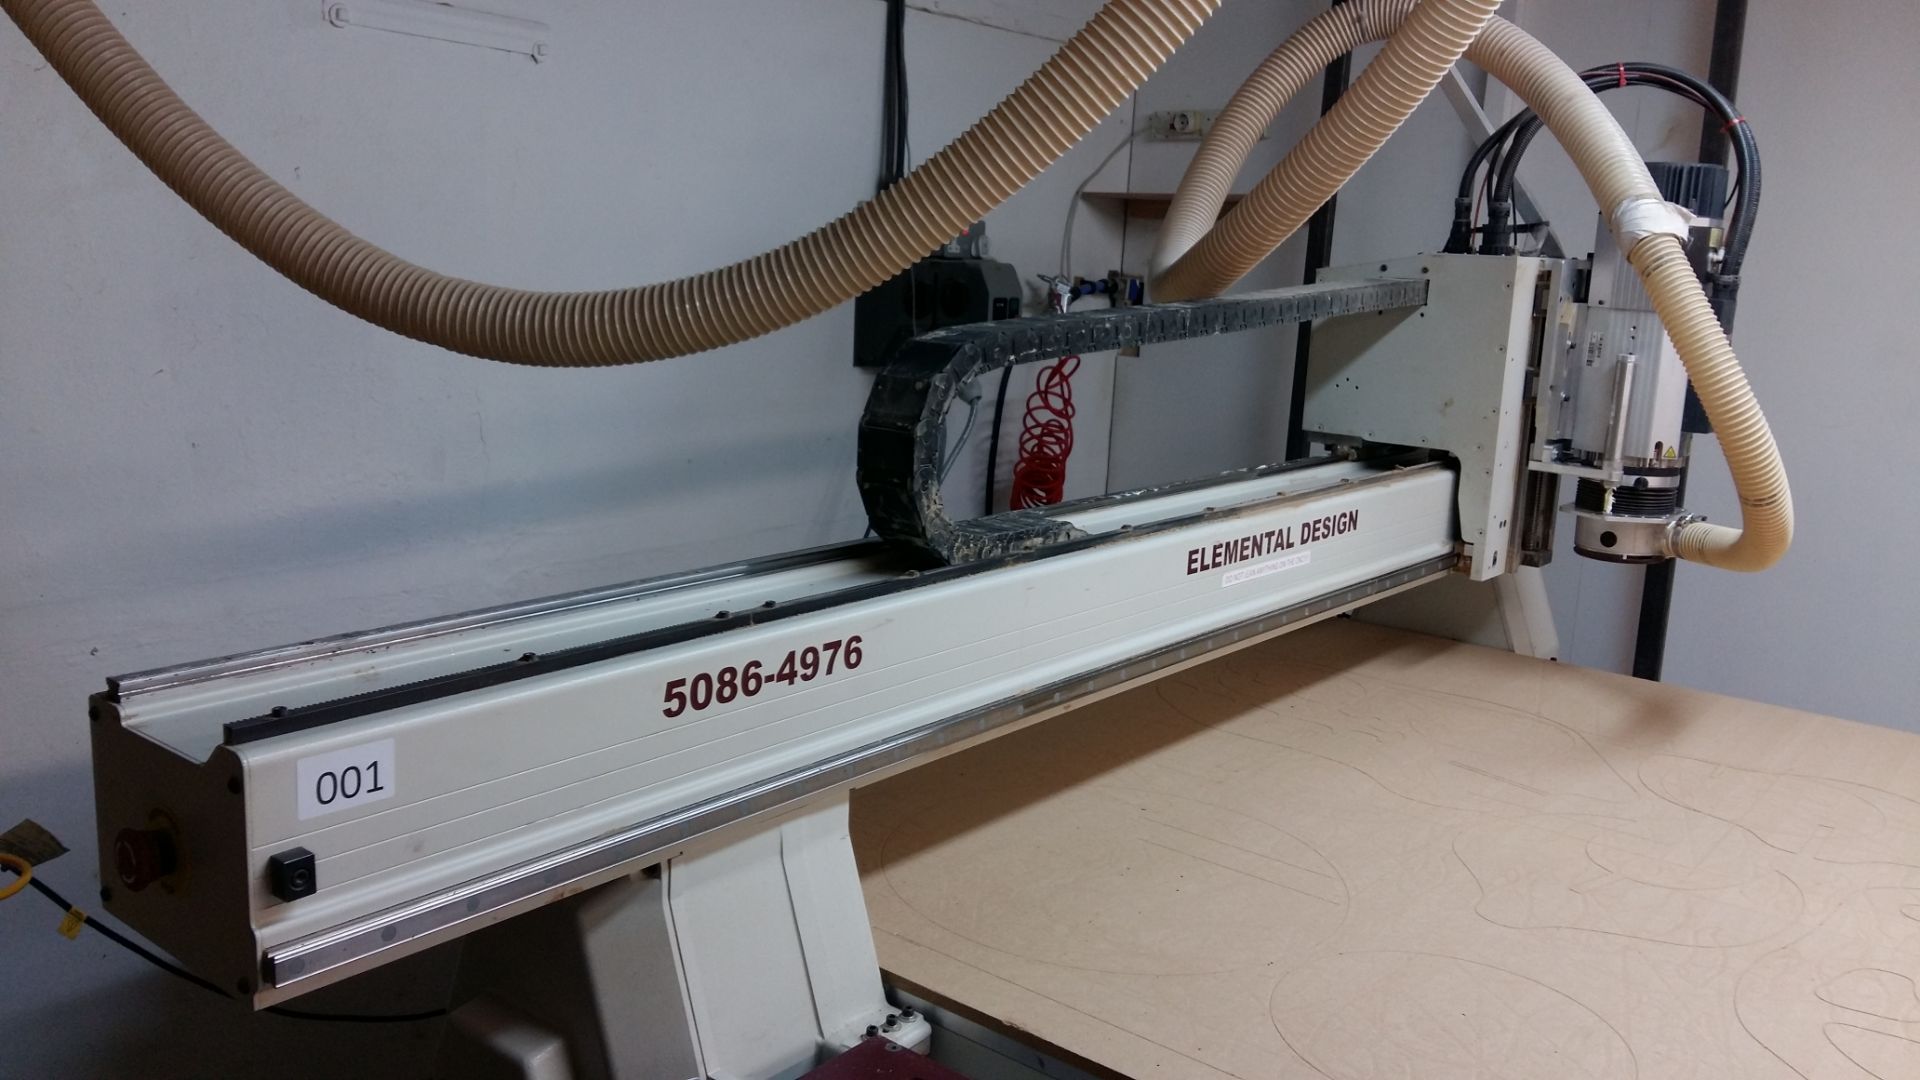 AXYZ 4010 7G CNC Router - Image 9 of 12